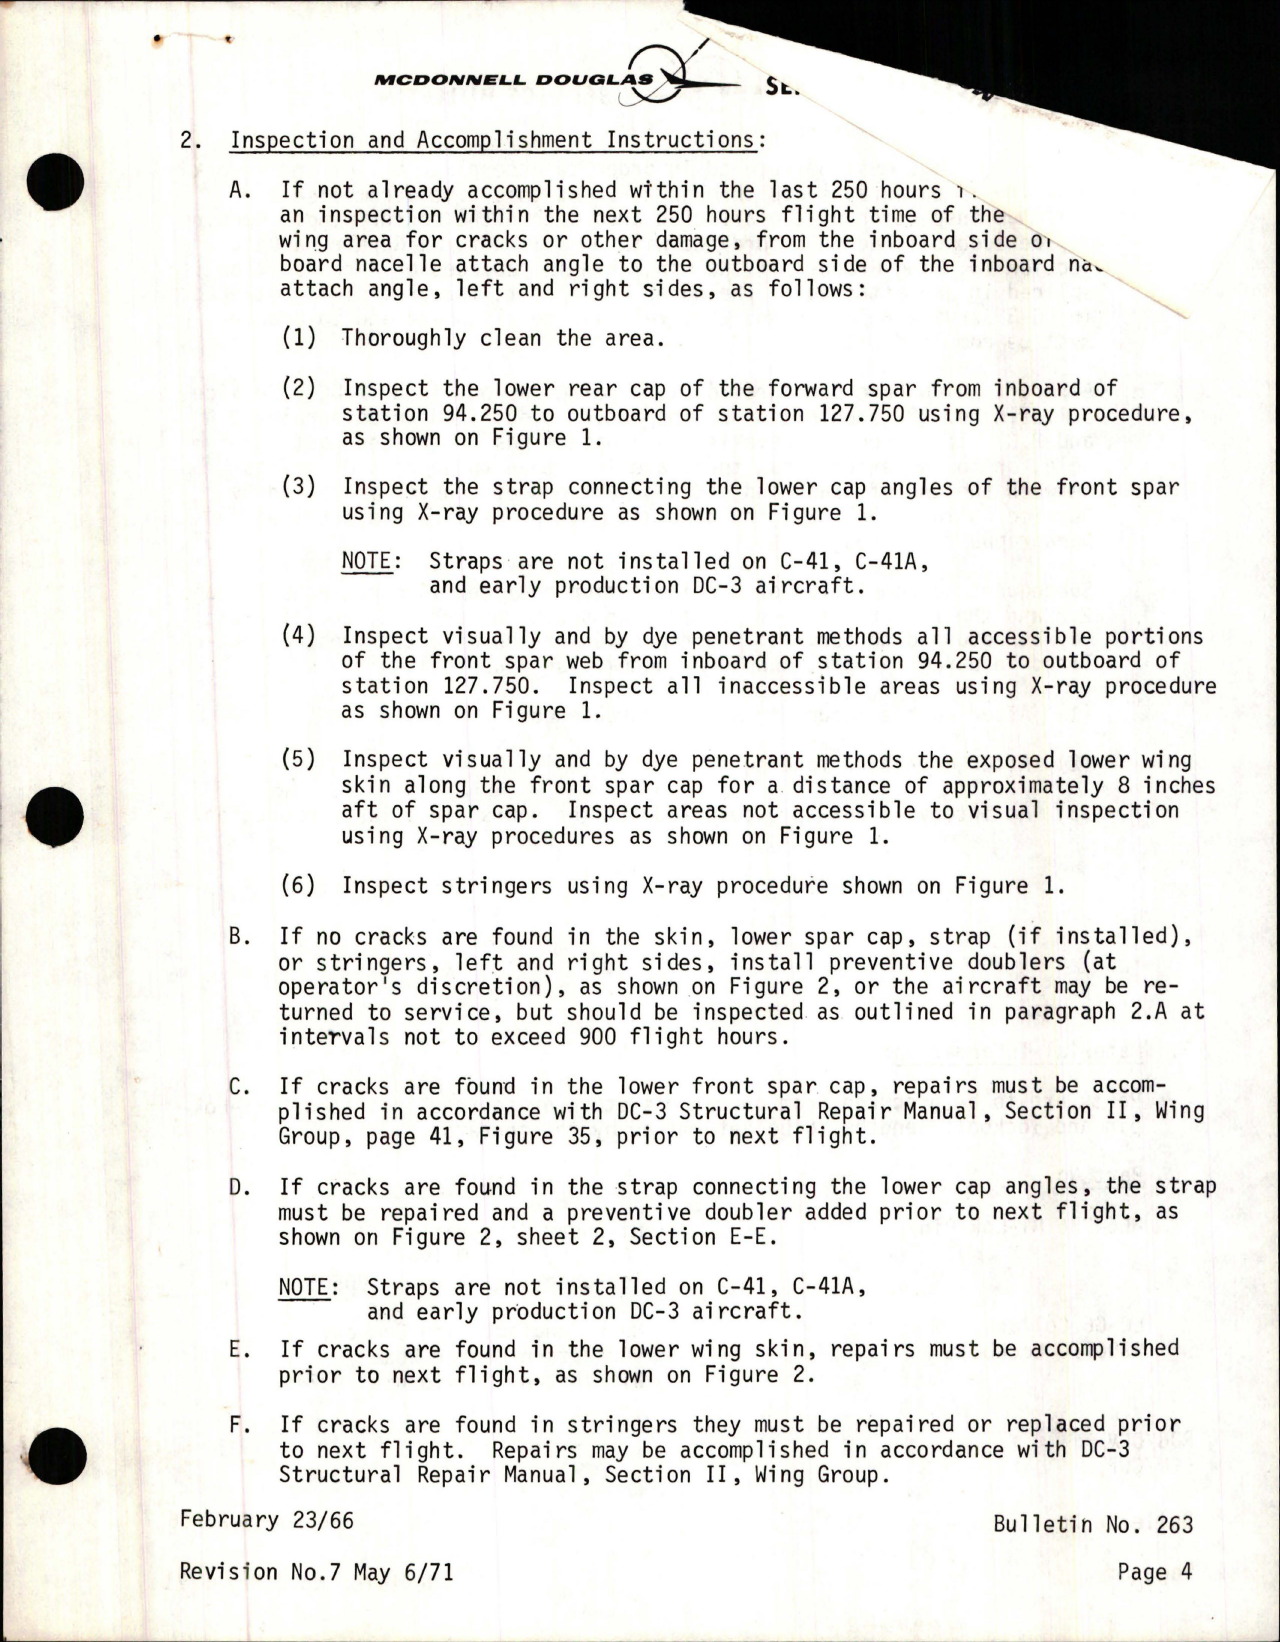 Sample page 5 from AirCorps Library document: Wings - Center Section - Lower Wing Skin Crack Repair and-or Reinforcement for DC-3